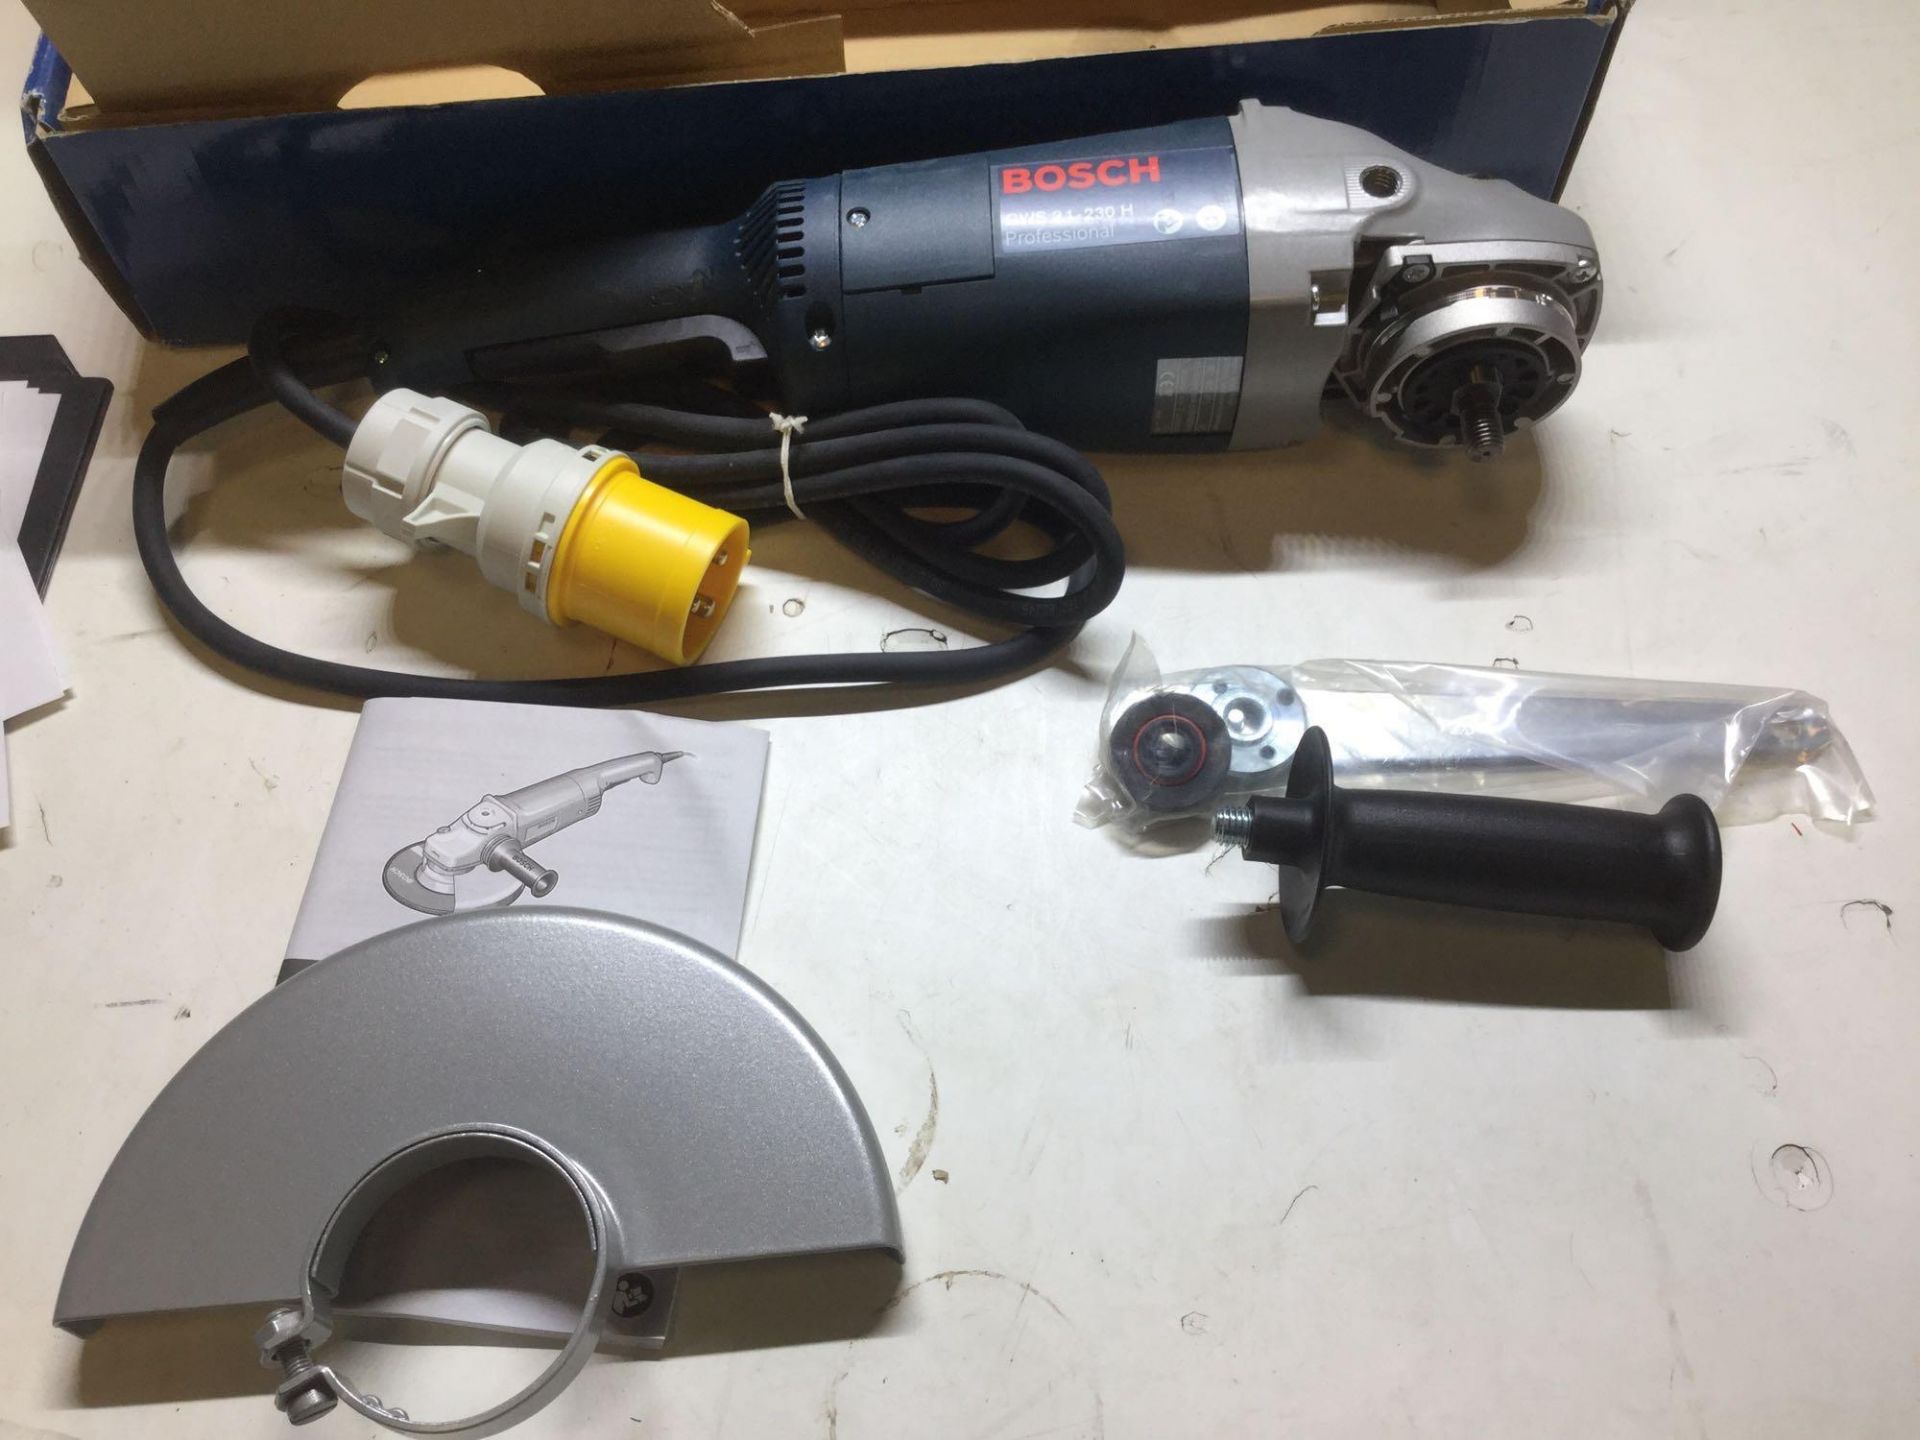 Bosch GWS 21 230 H 9 inch Angle Grinder 110v (New In Box) - Image 2 of 6